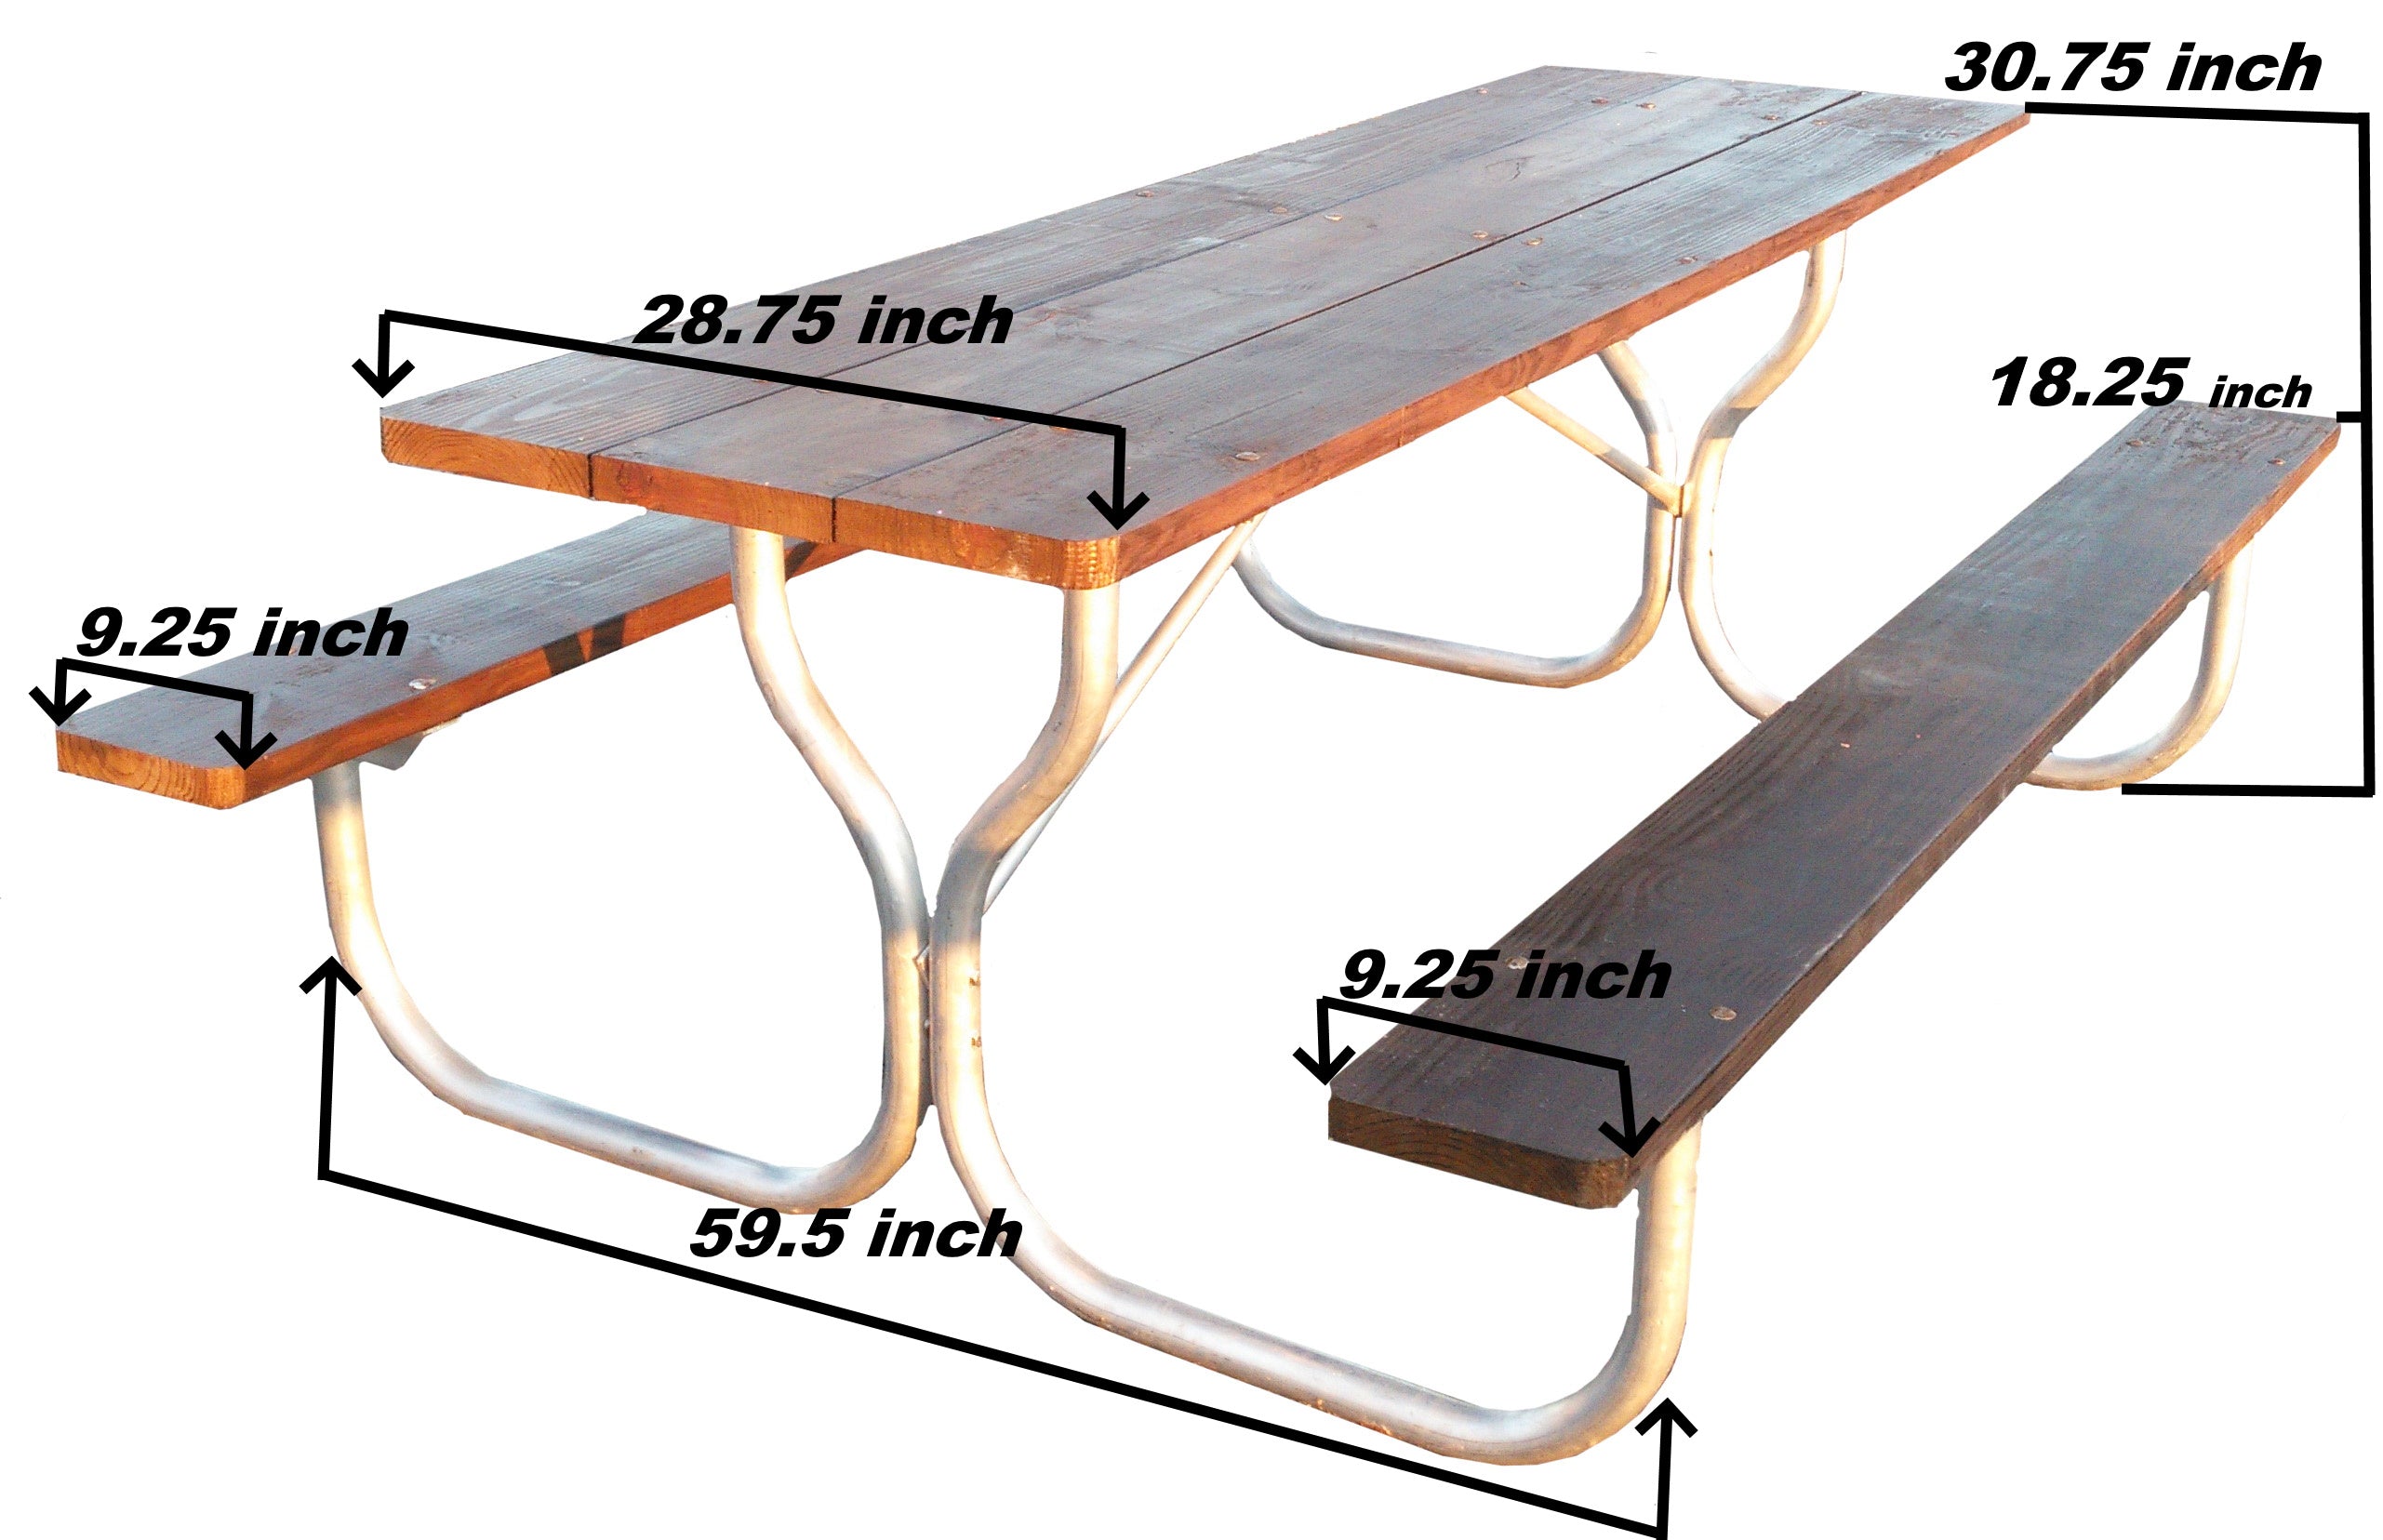 Aluminum Picnic Table frame carriage bolt style - frame only